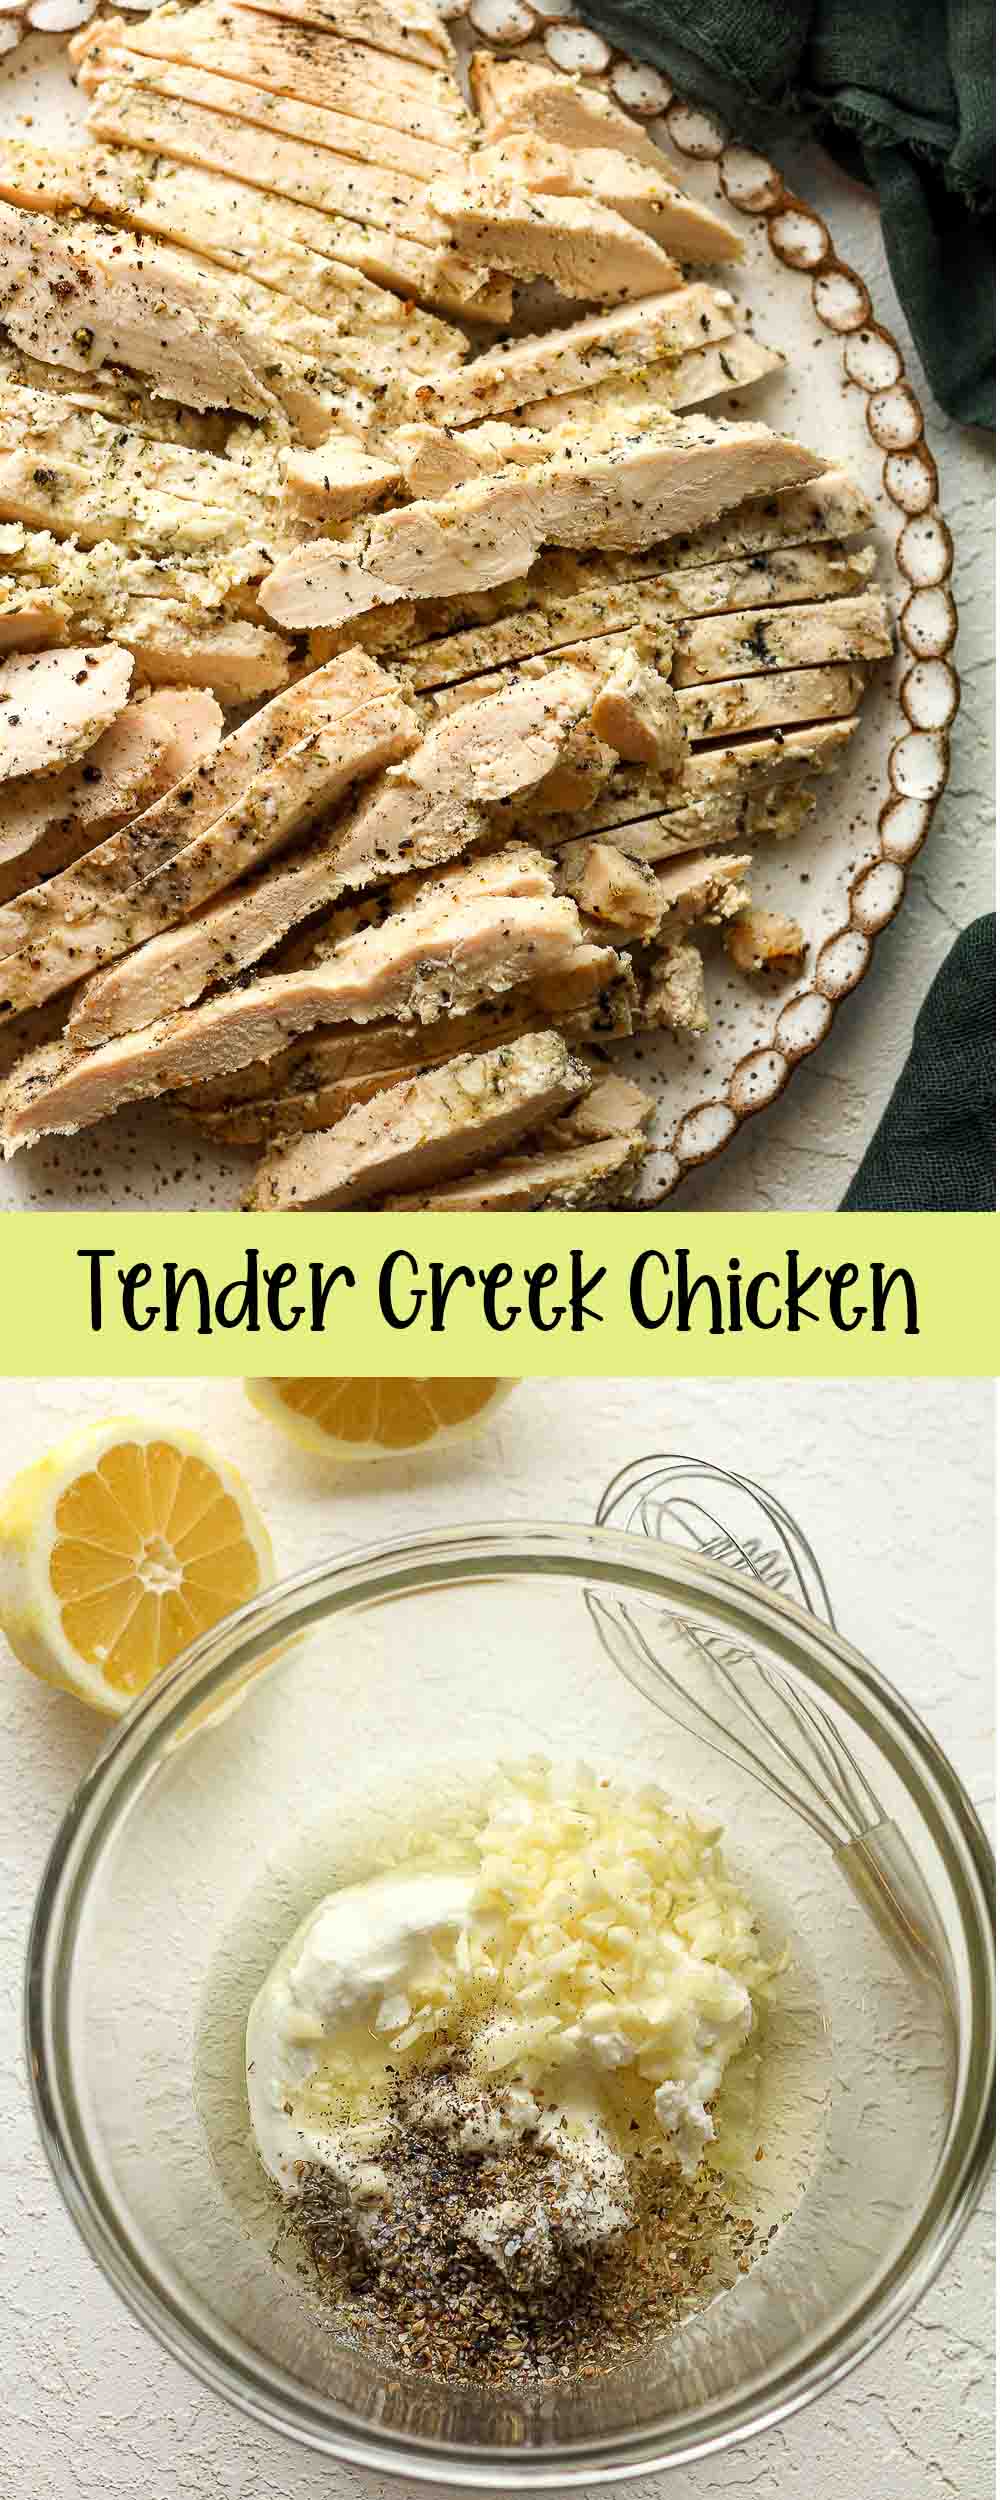 A large plate of the Tender Greek Chicken and a bowl of the marinade.